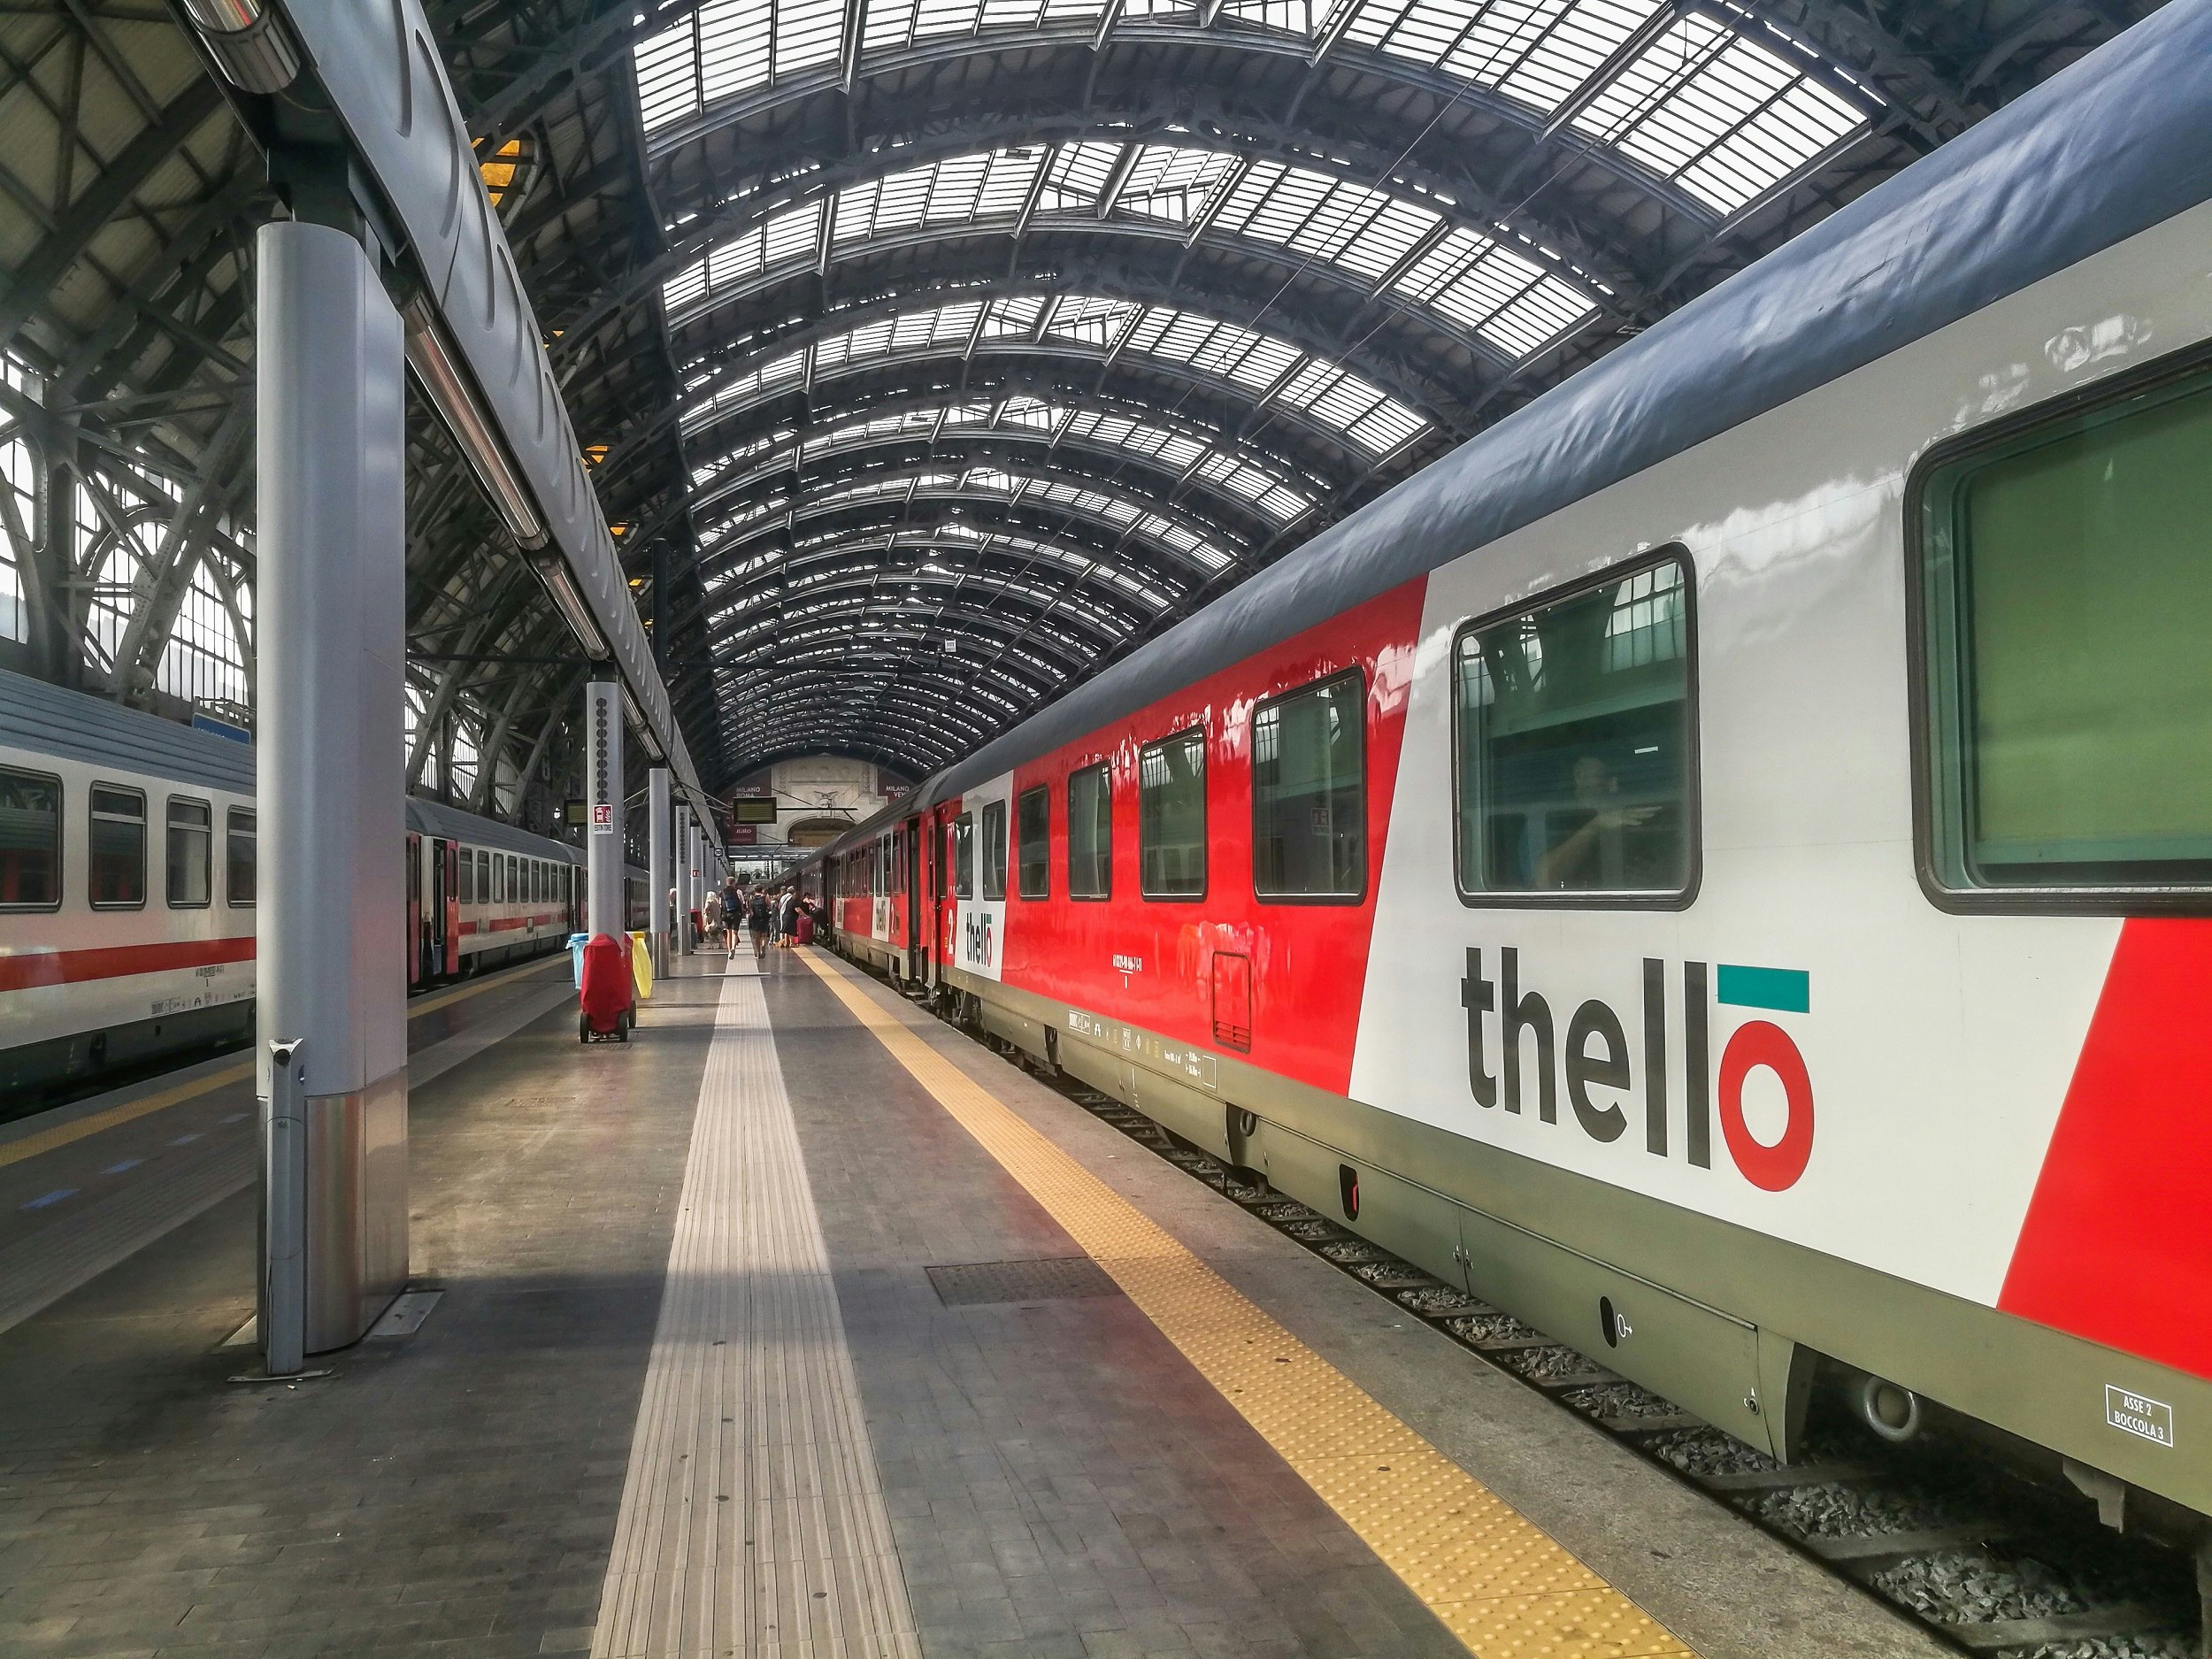 A red-and-white train with the word "Thello" on its side waits at a train station platform